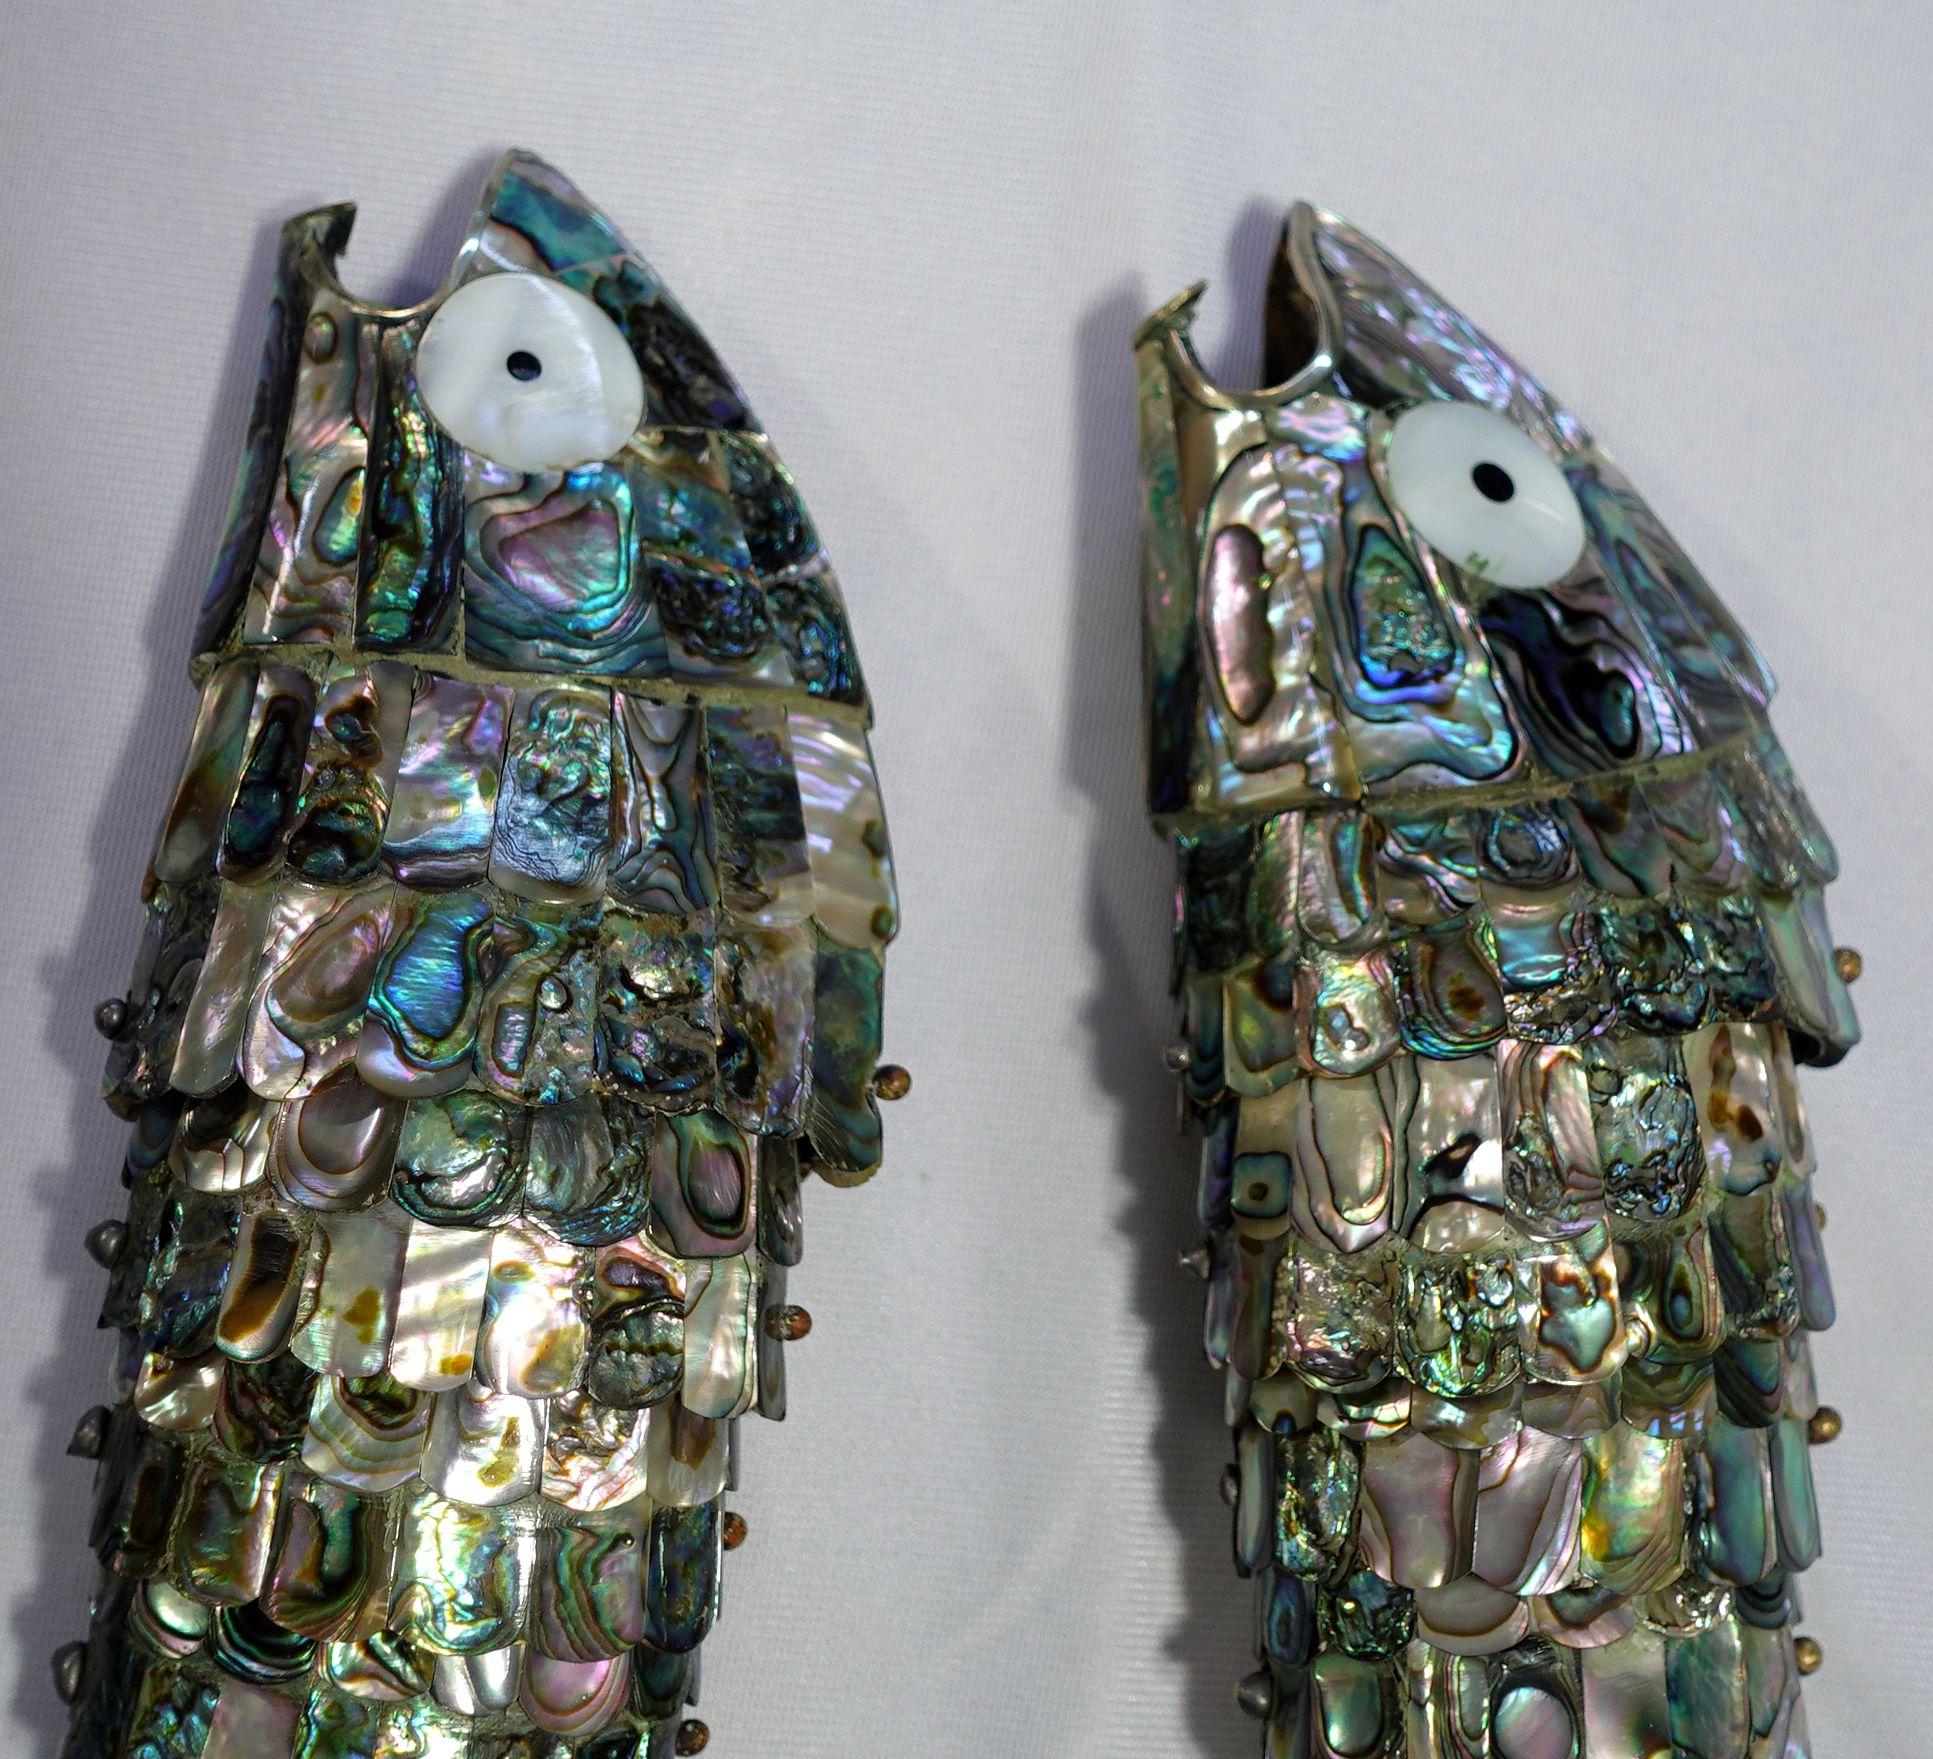 A pair of Large Articulated Silver and Abalone Shell Fish Sculpture/ Bottle Opener by Los Castillo, from Mexico wonderful addition to any bar or midcentury bar, and stands alone on the tail or lay to display.